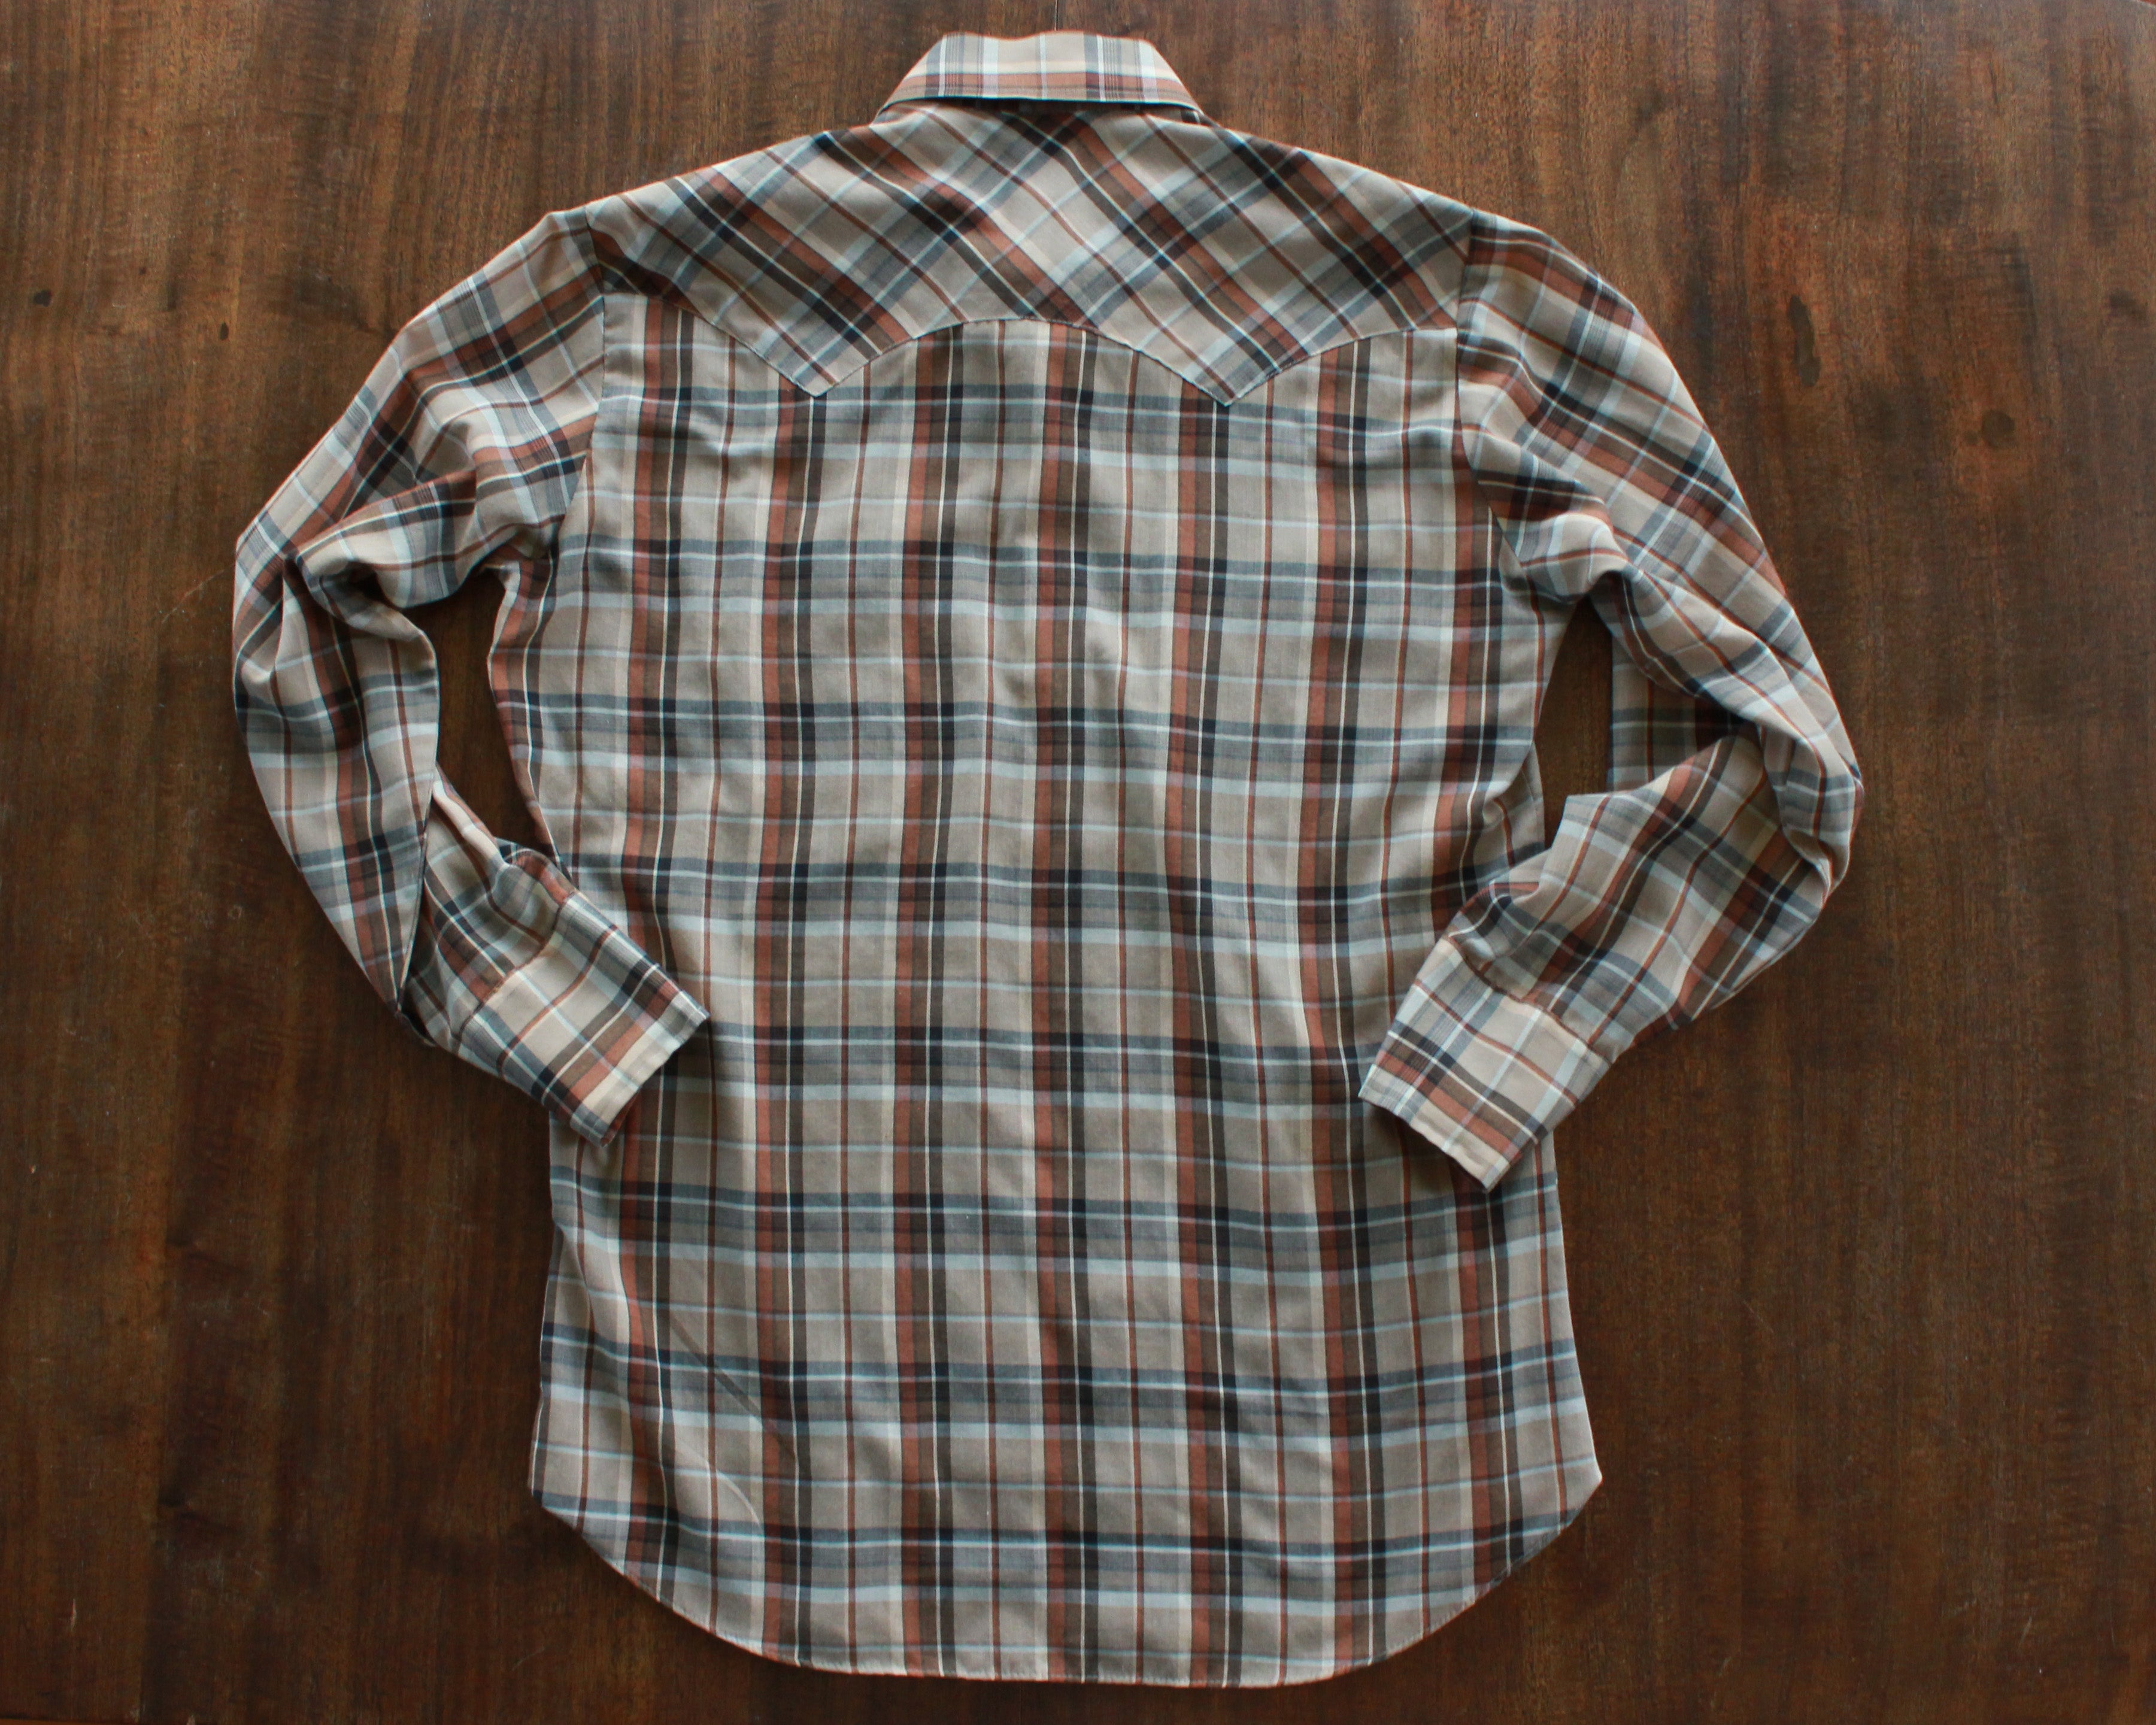 Lightweight plaid shirt with pearl snaps by Levi's size medium